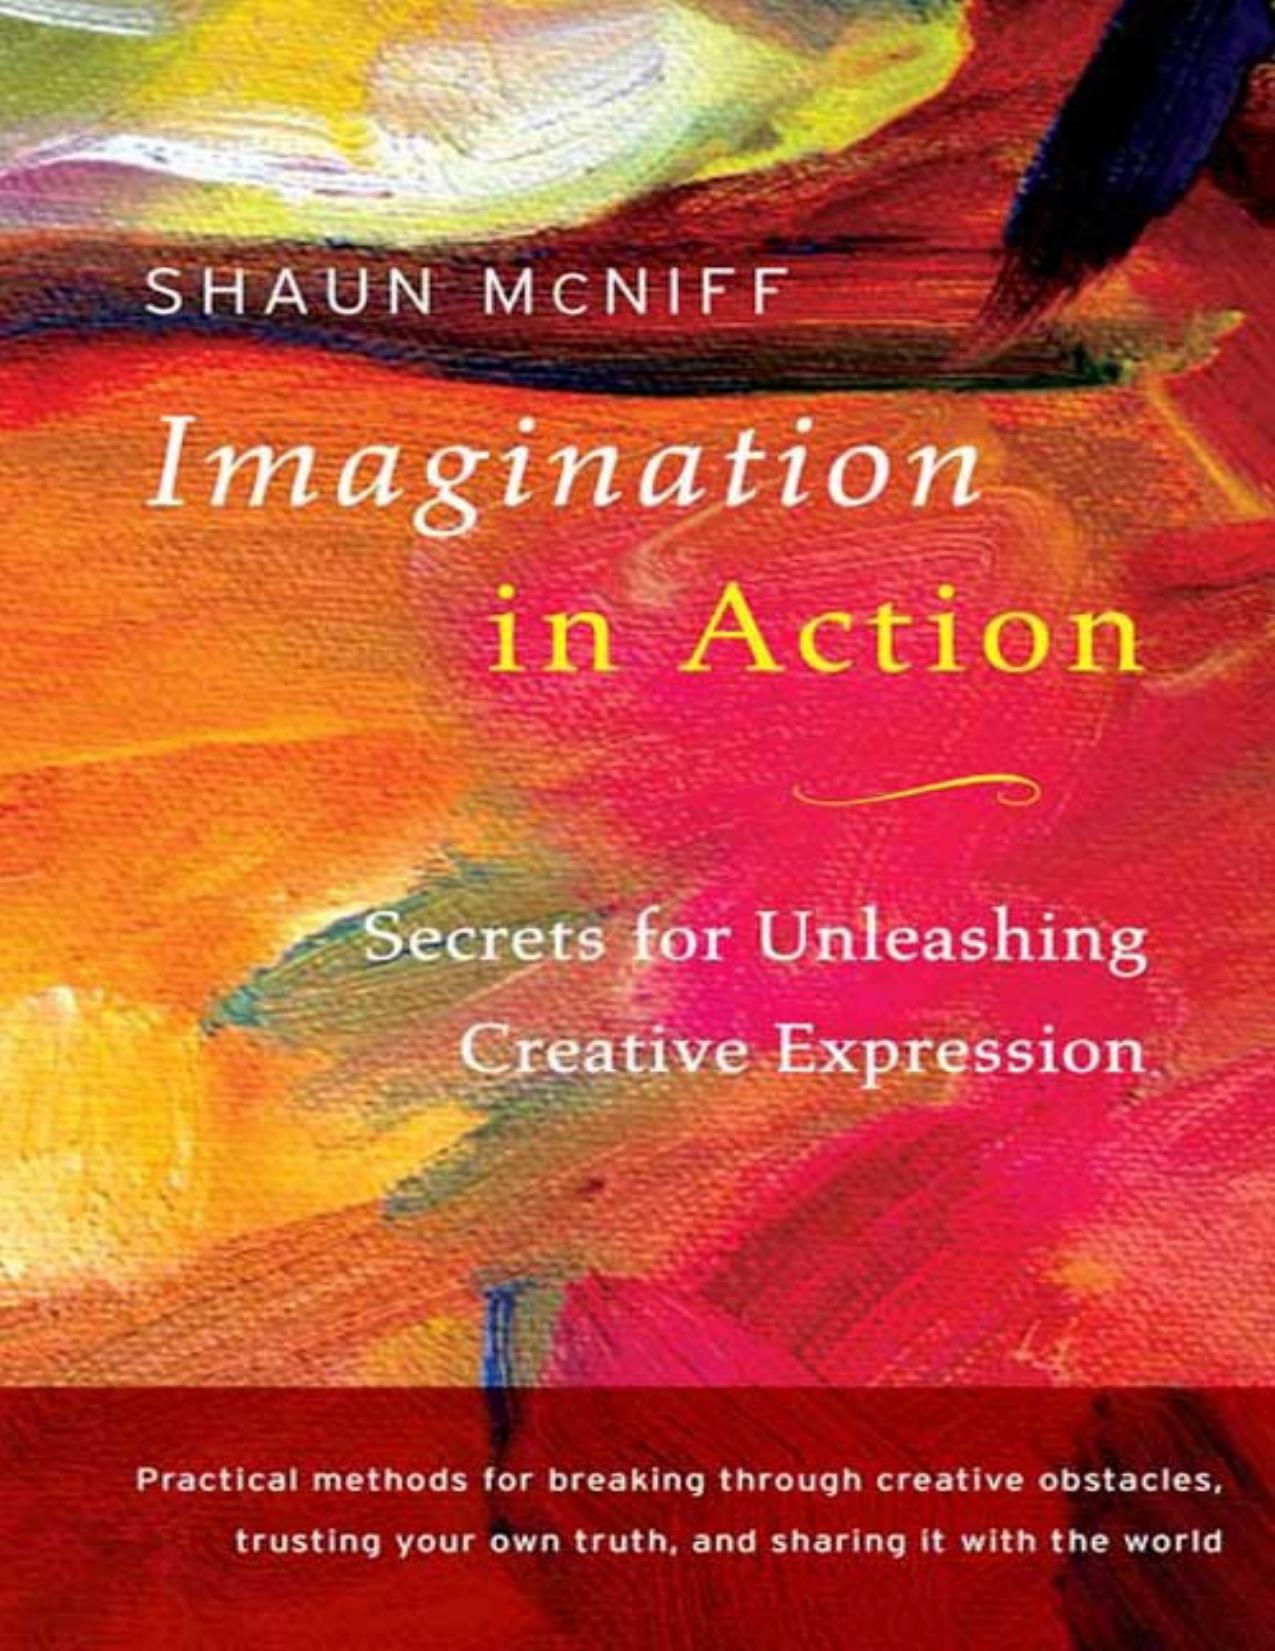 (eBook PDF)Imagination in Action: Secrets for Unleashing Creative Expression by Shaun McNiff